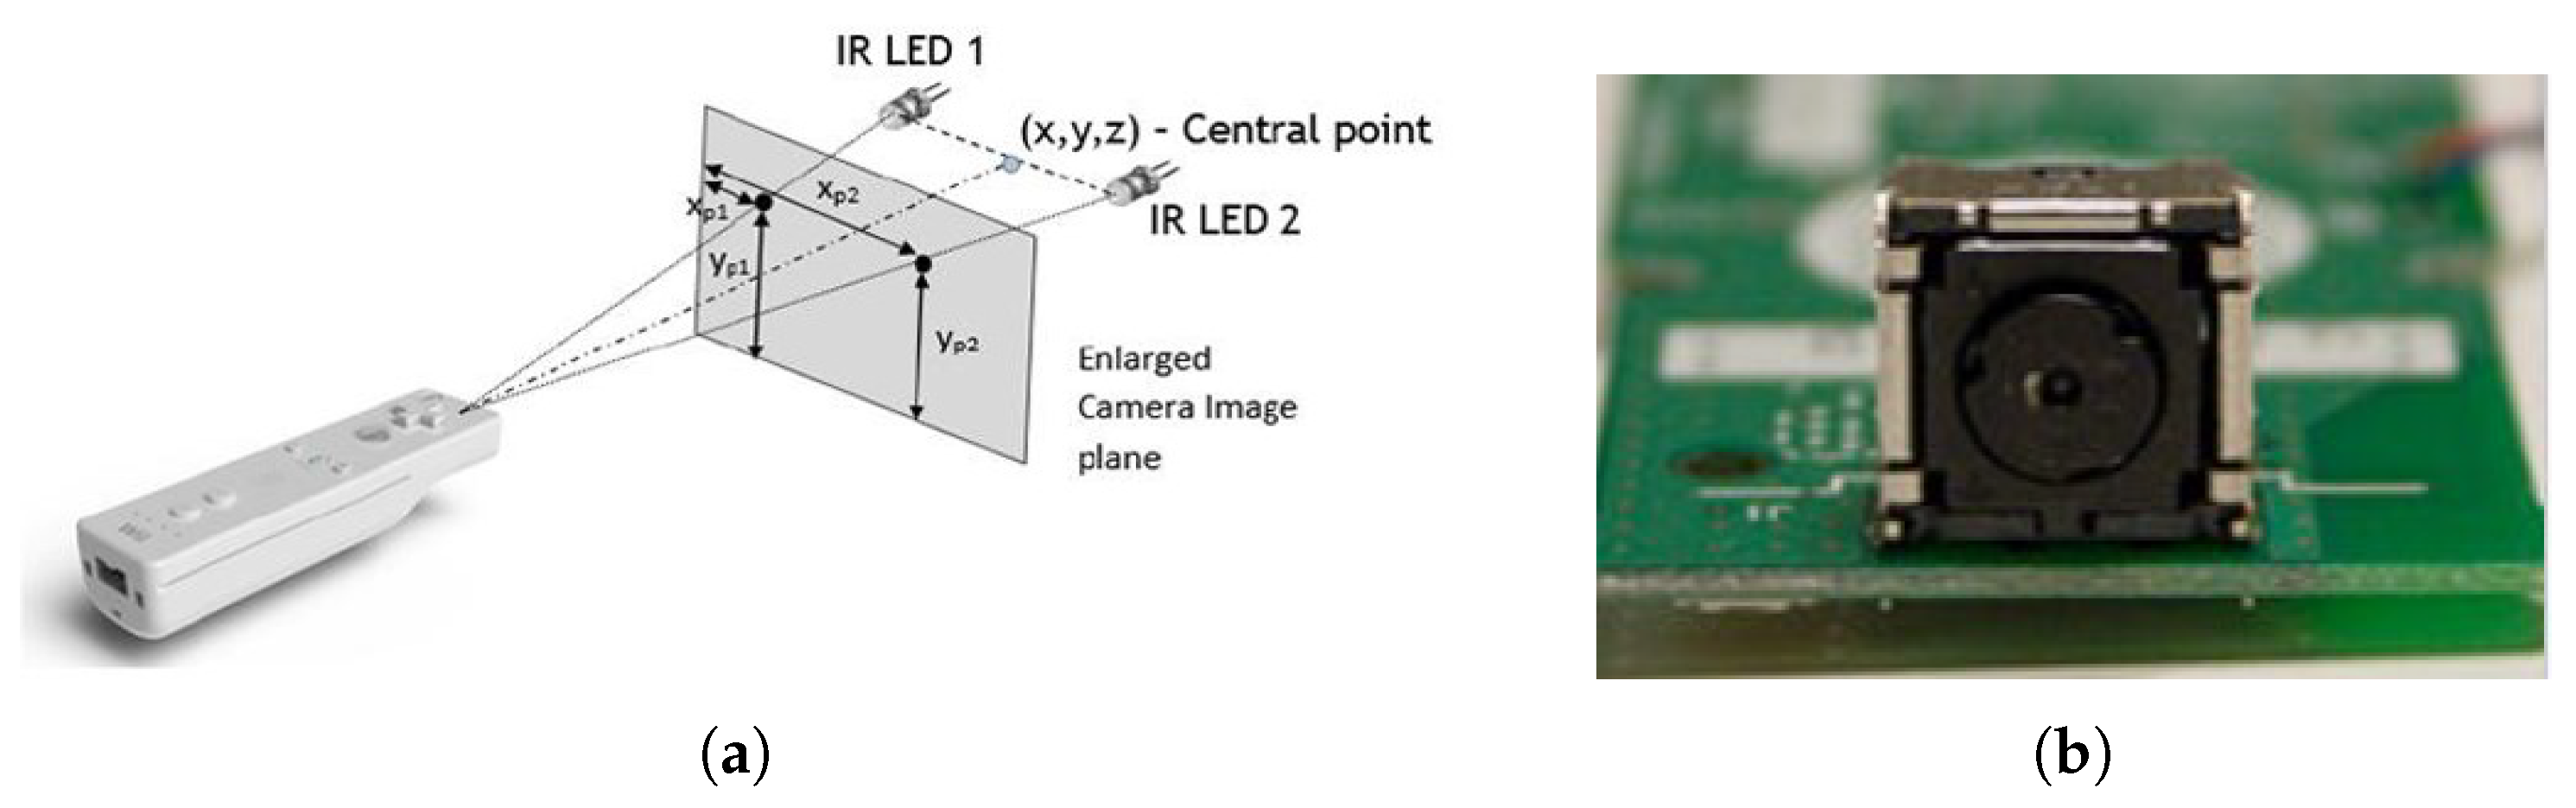 Sensors | Free Full-Text | Outdoor Target Positioning Using Wii Remote IR  Camera and Signal Modulation | HTML